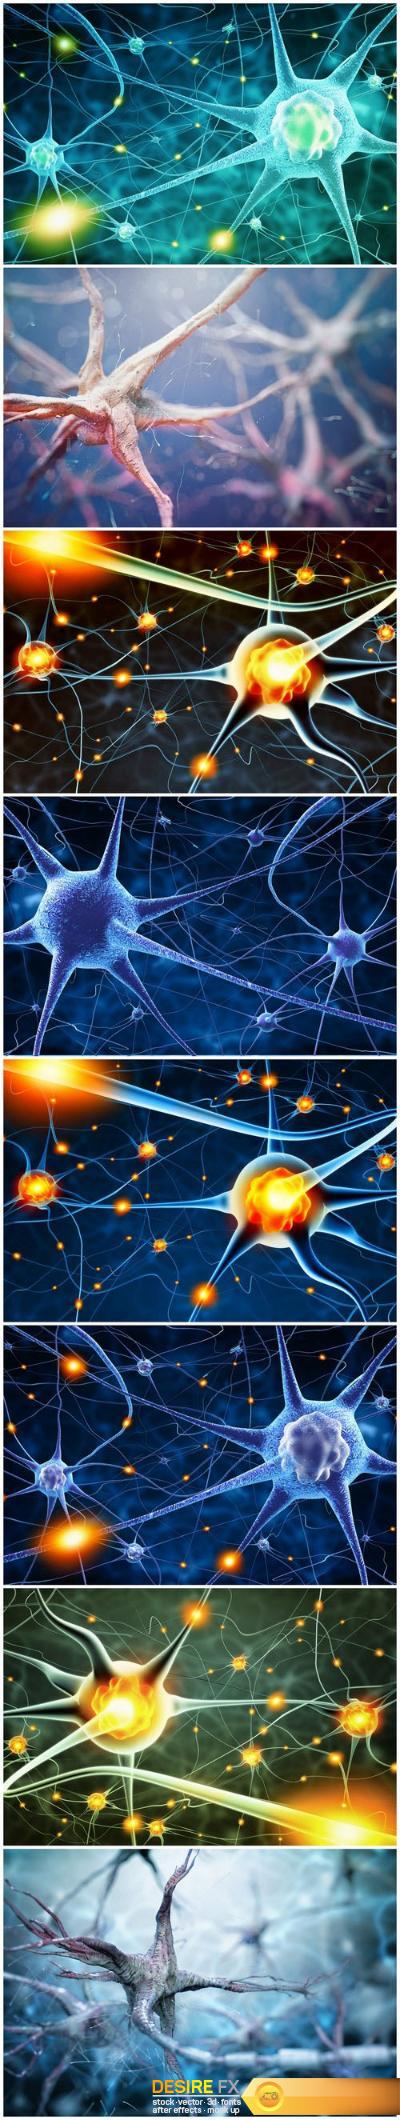 Active nerve cells – Set of 8xUHQ JPEG Professional Stock Images